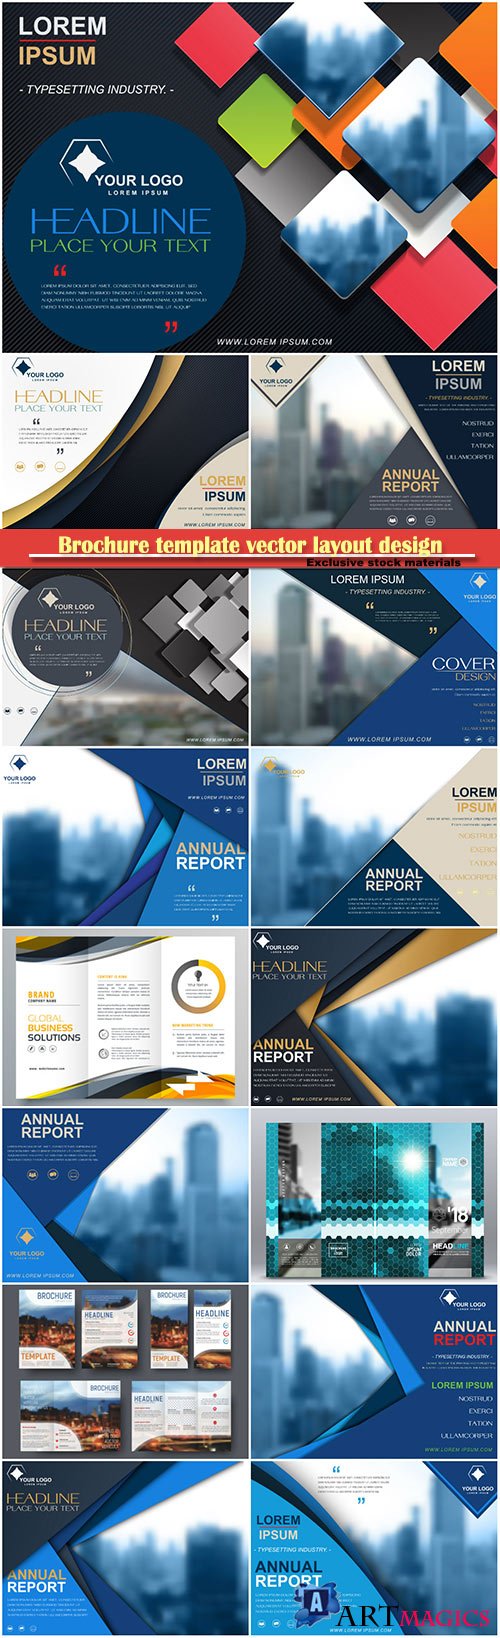 Brochure template vector layout design, corporate business annual report, magazine, flyer mockup # 114